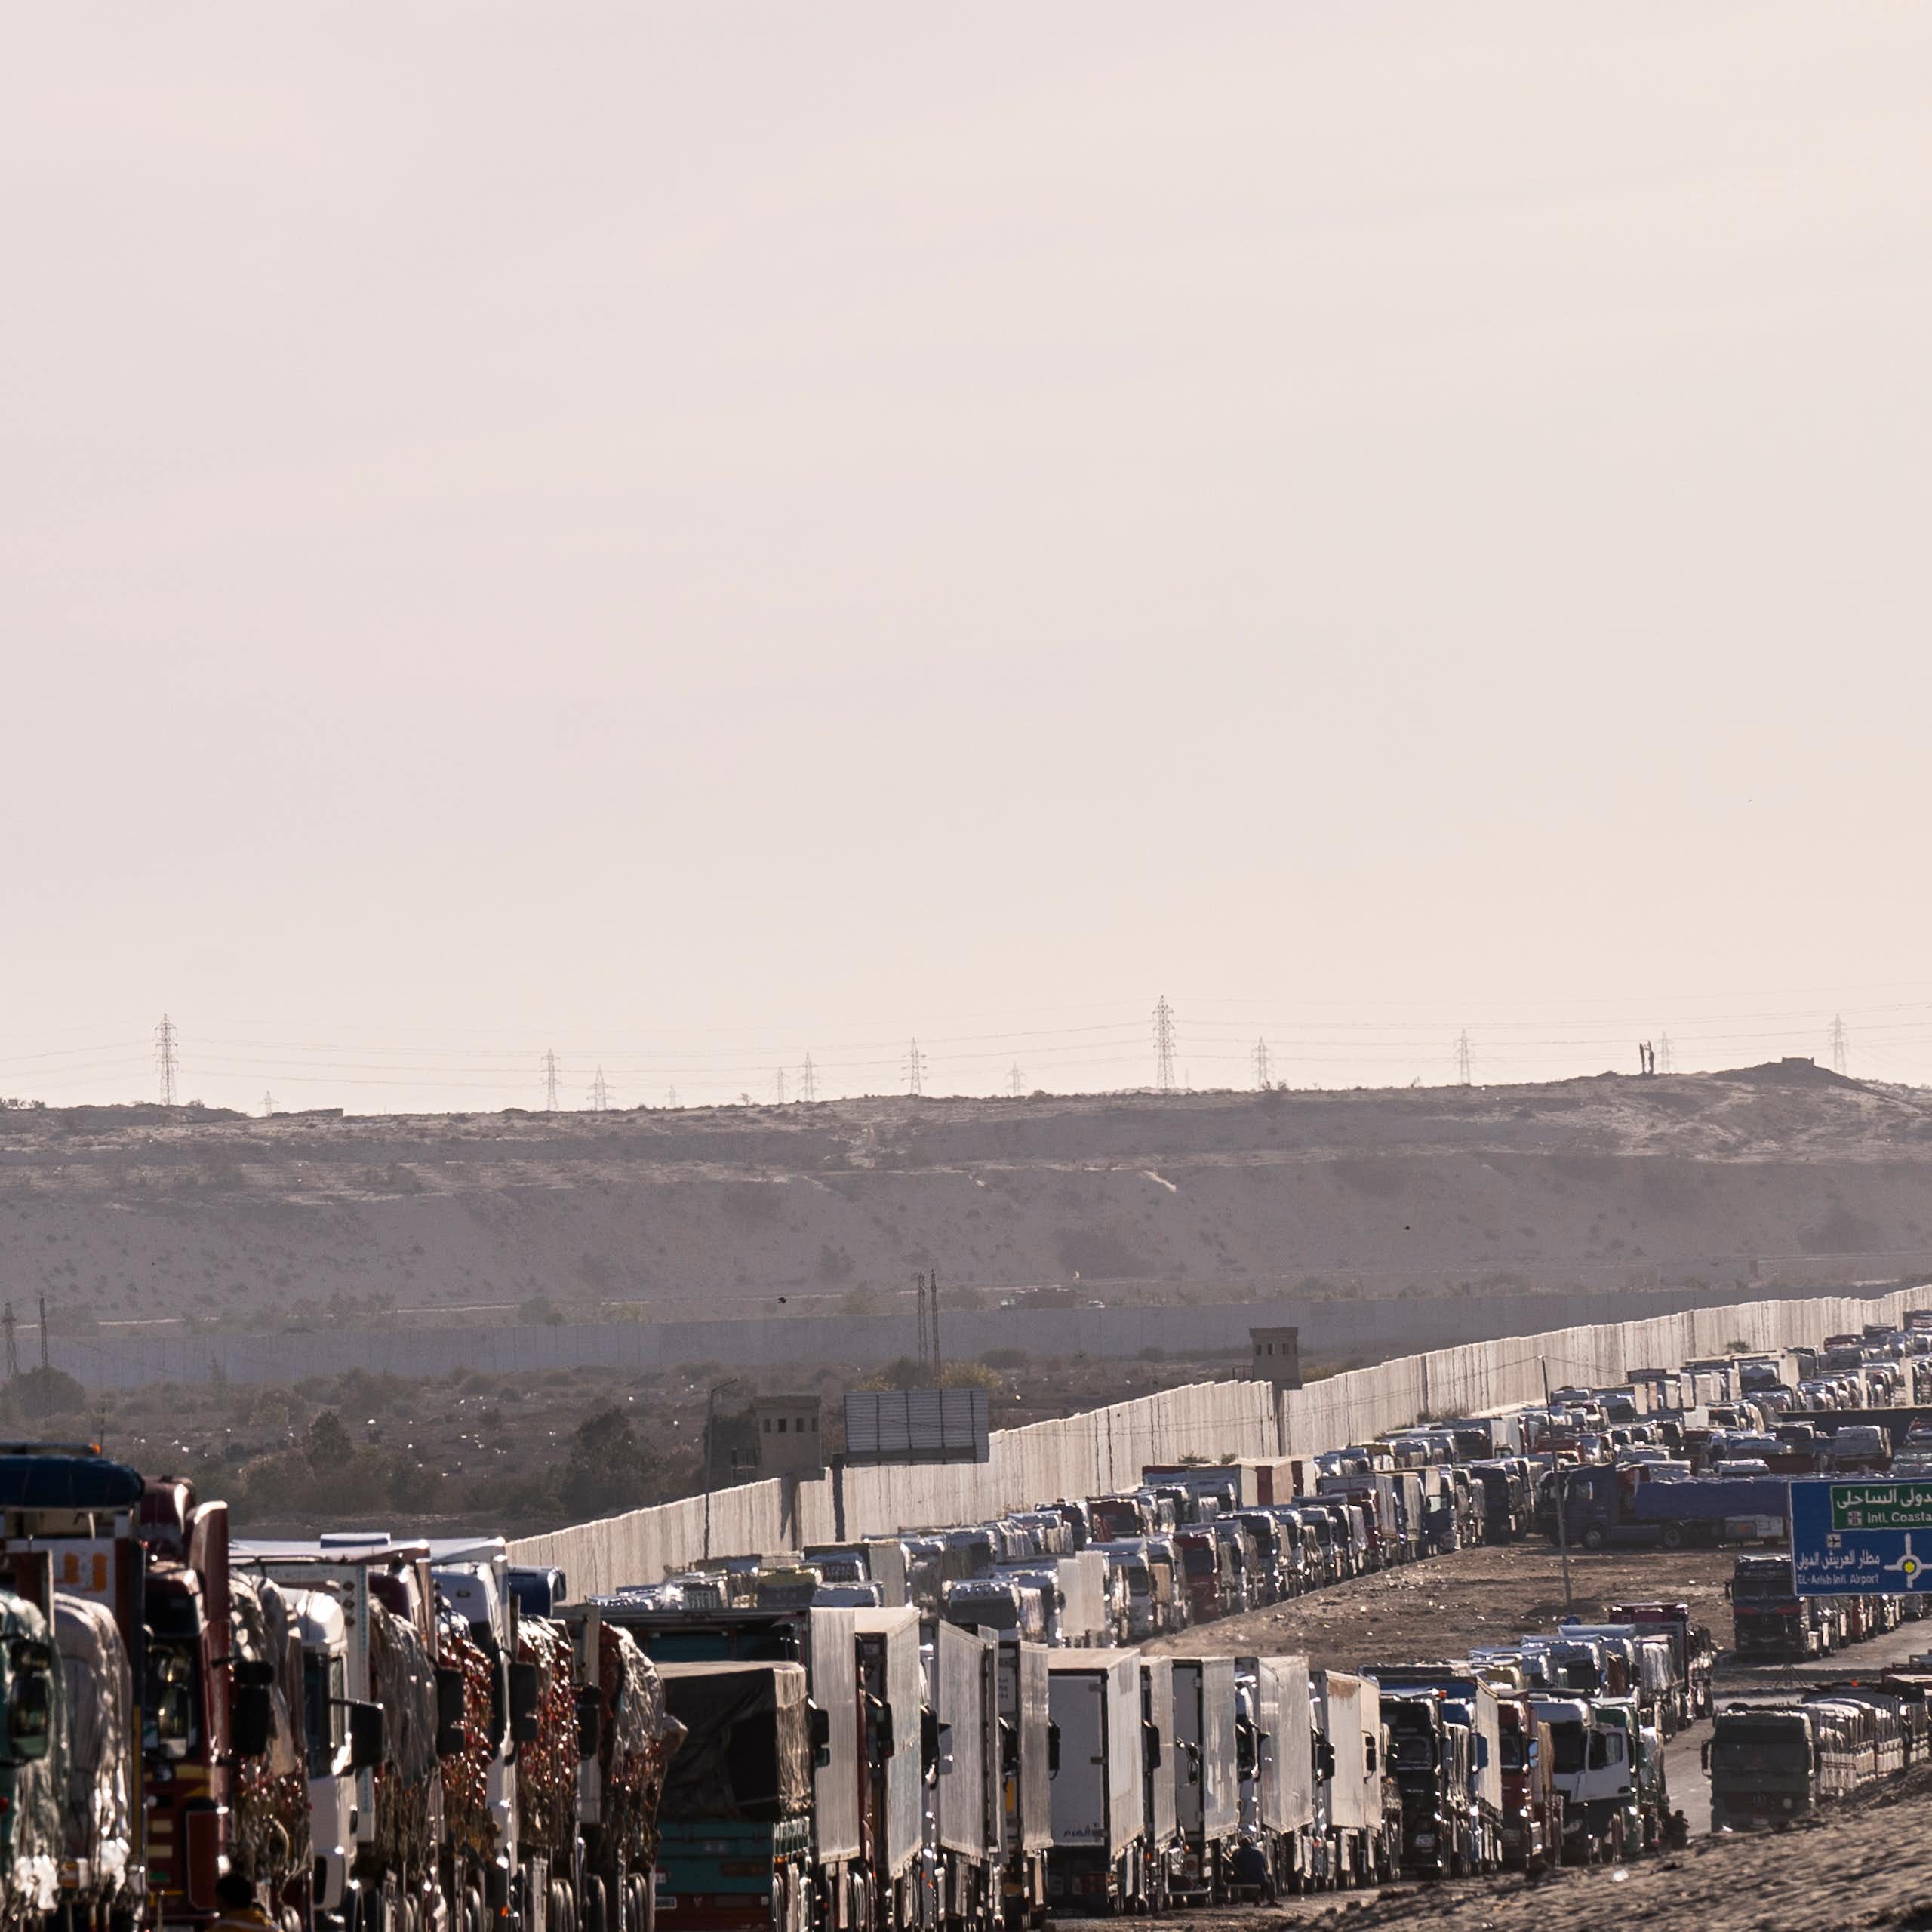 Two very long lines of trucks congest a highway, with a white wall and grey sky in the background.